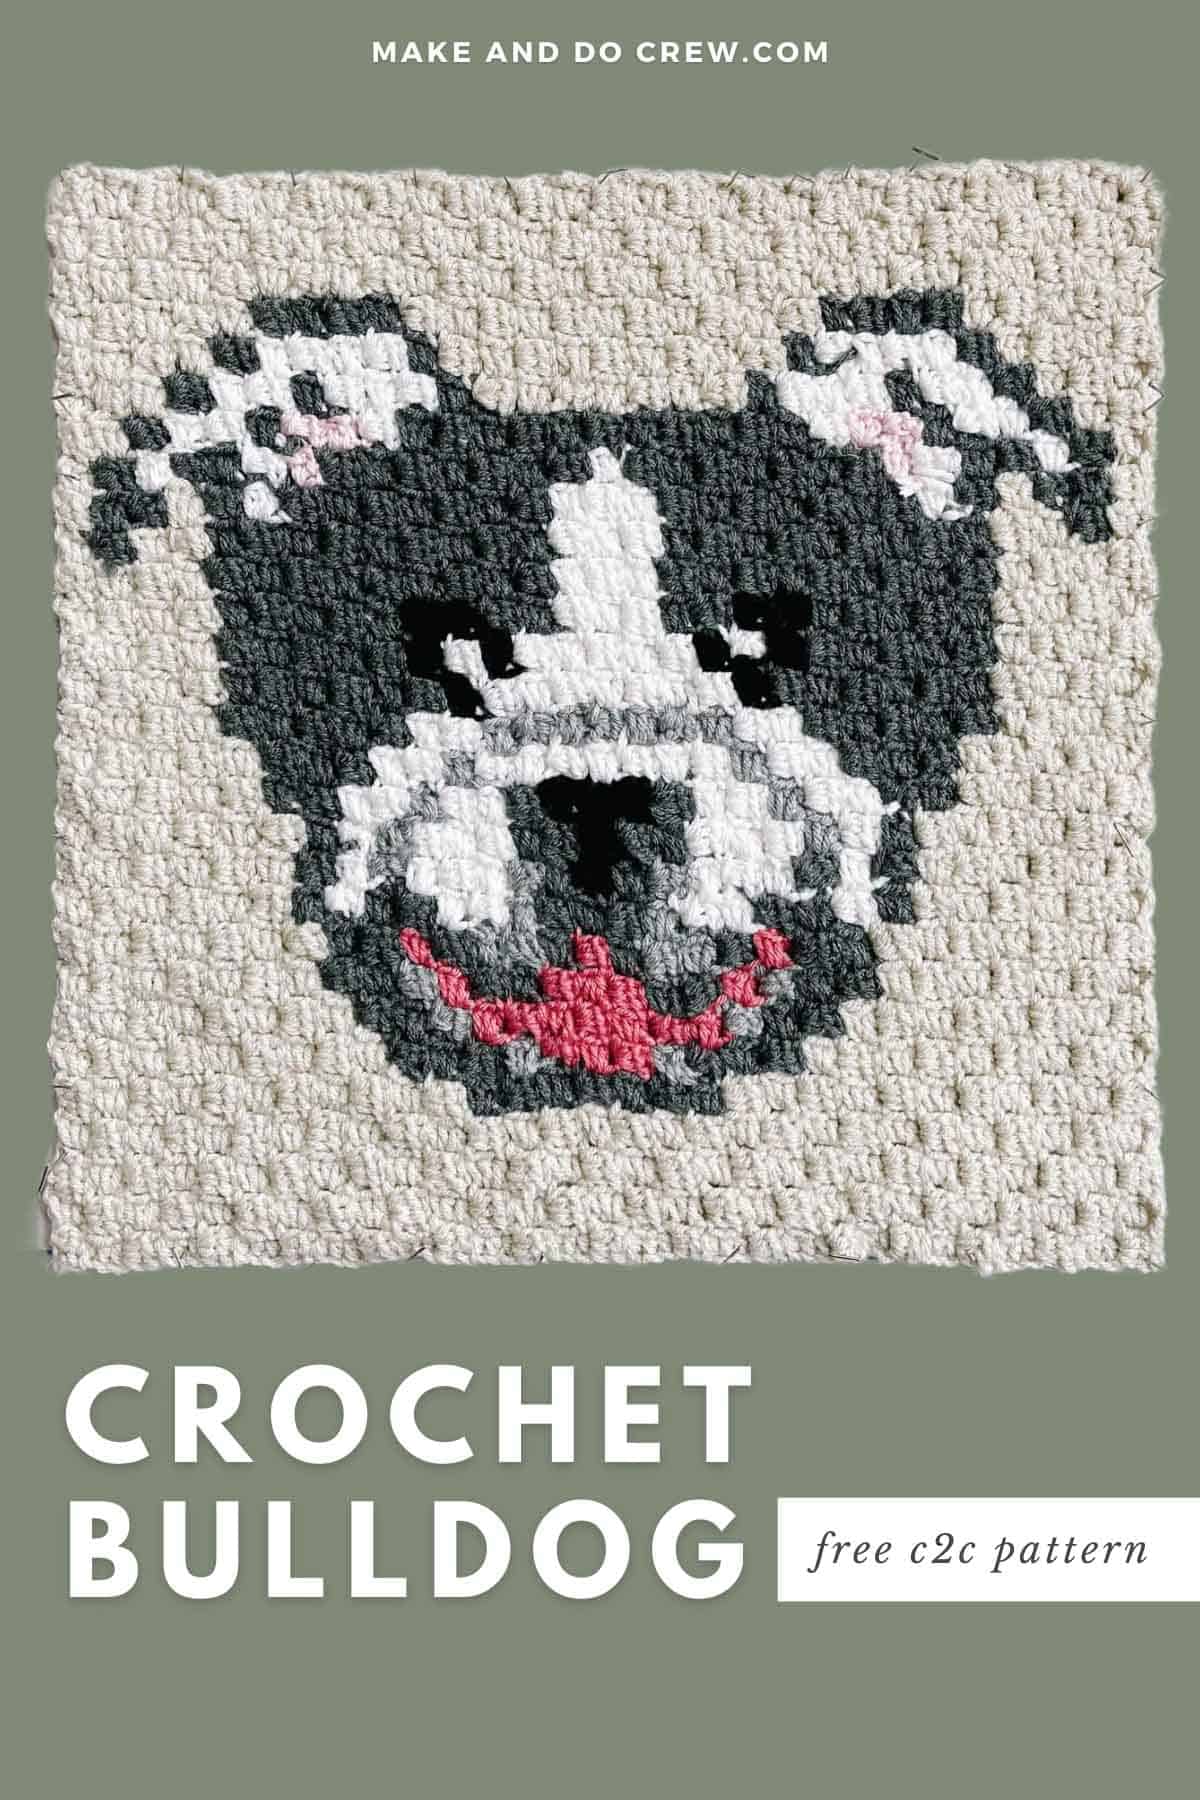 This image shows a free crochet pattern for a corner to corner crochet blanket square featuring a gray and white Bulldog face on a green background.